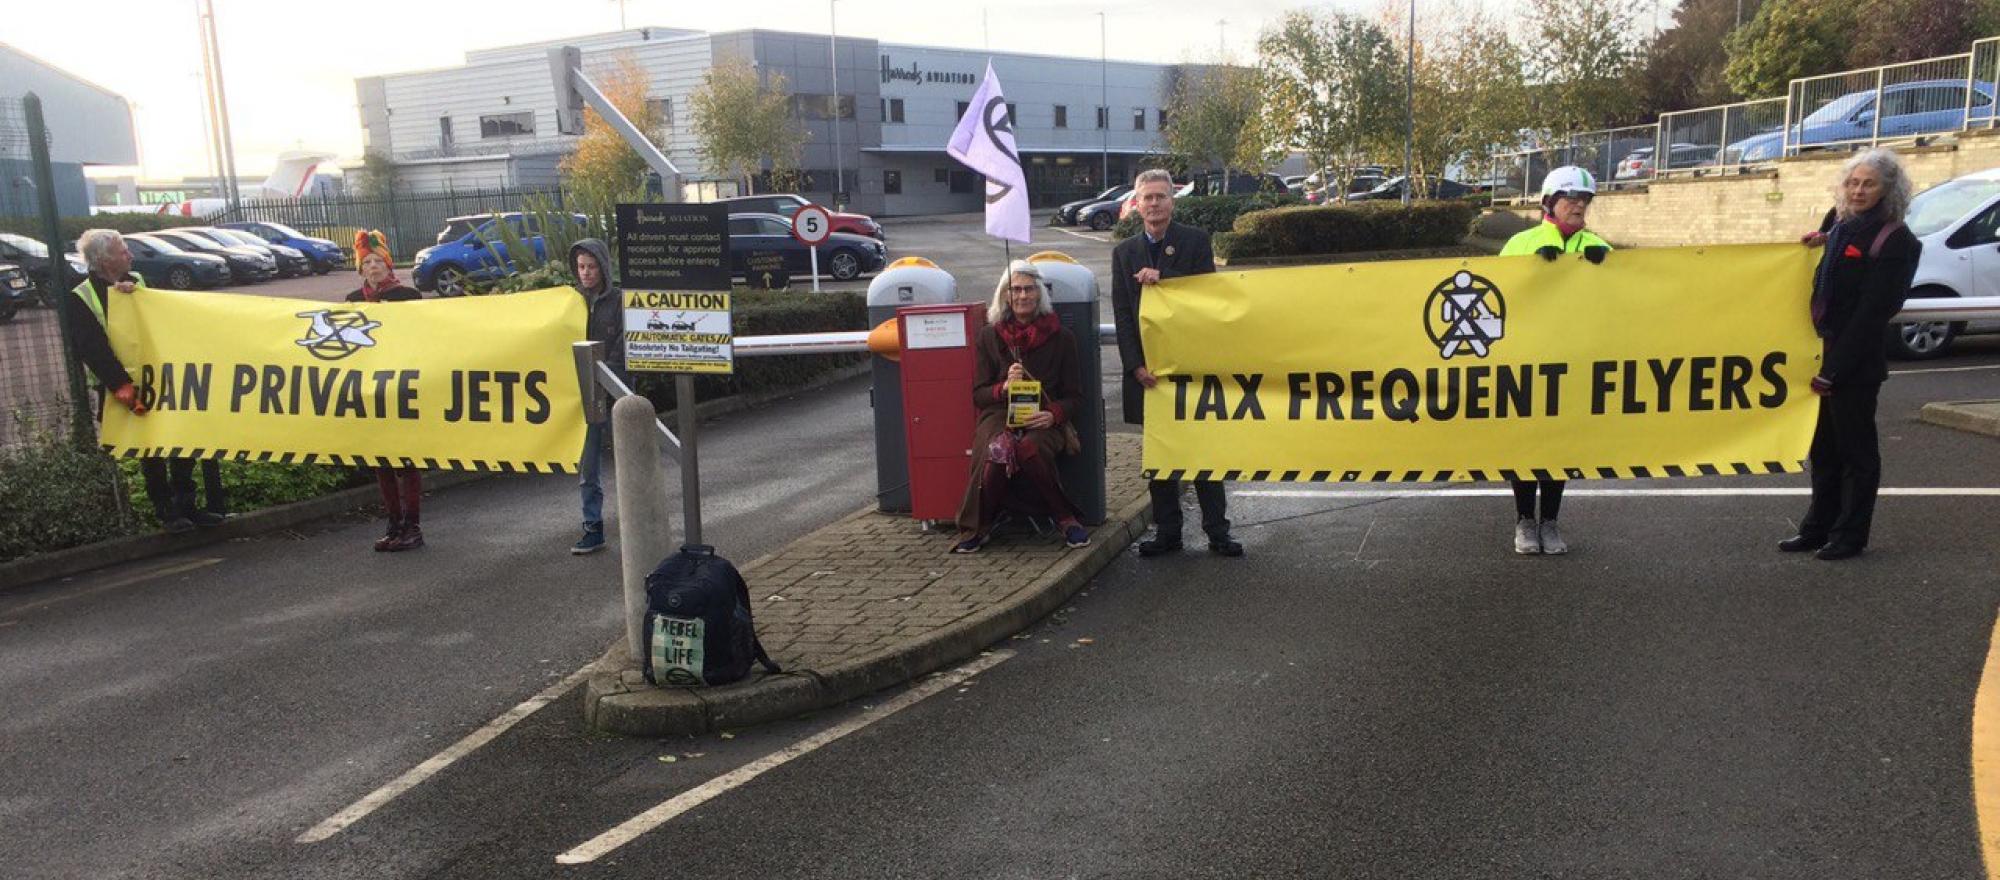 Climate protestors targeted business aviation operations at European airports this week. 